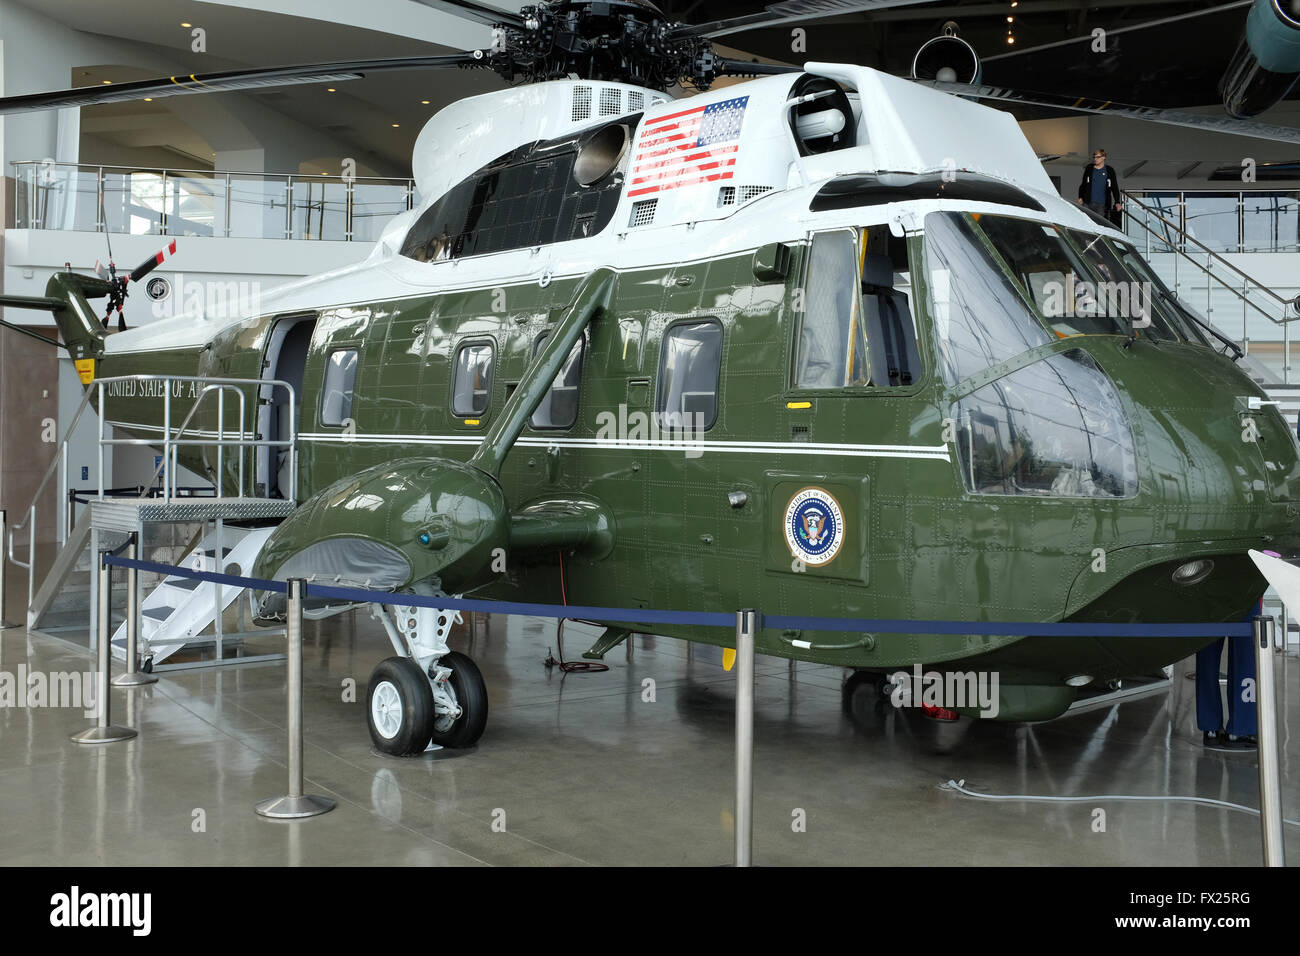 Marine Force One in Ronald Reagan Presidential Library and Museum, Simi Valley, California Stock Photo